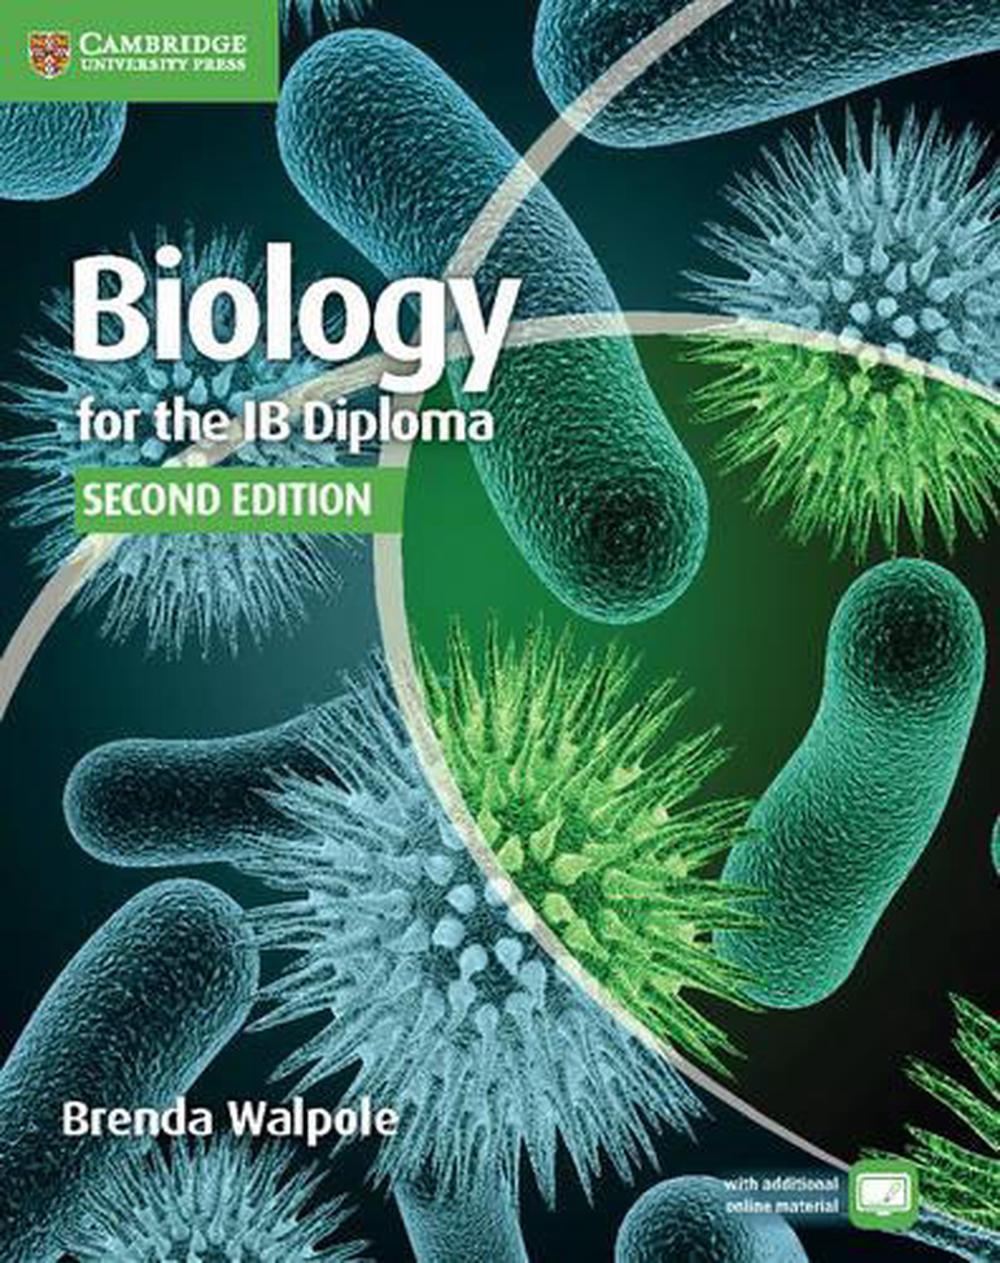 research biology books